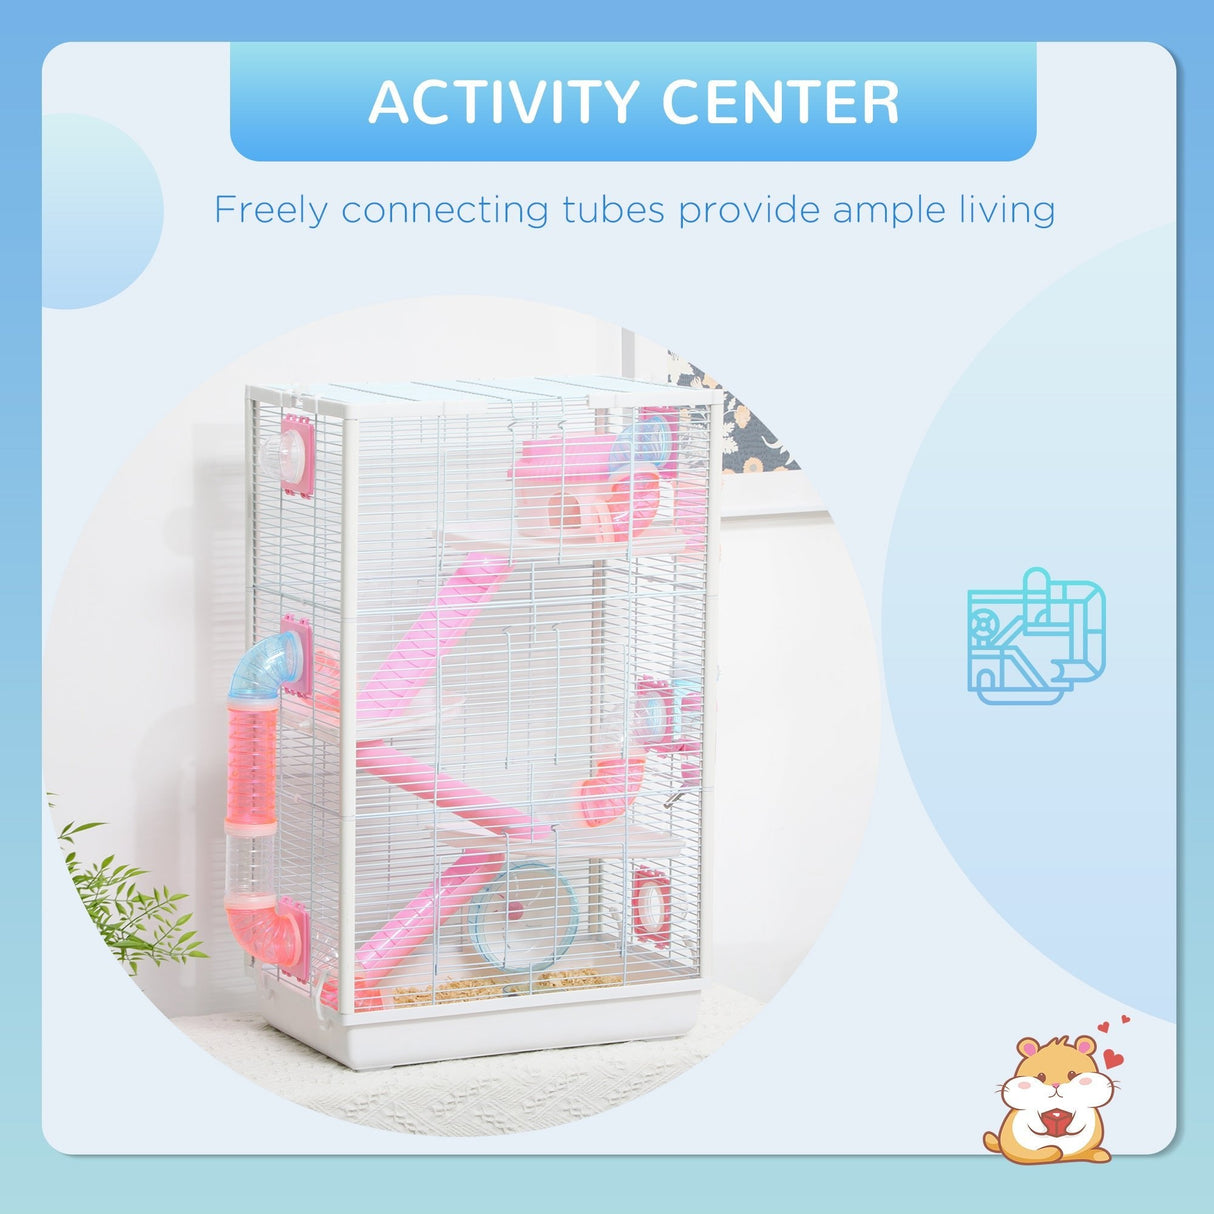 Multi-Level Hamster & Gerbil Cage with Accessories, PawHut,